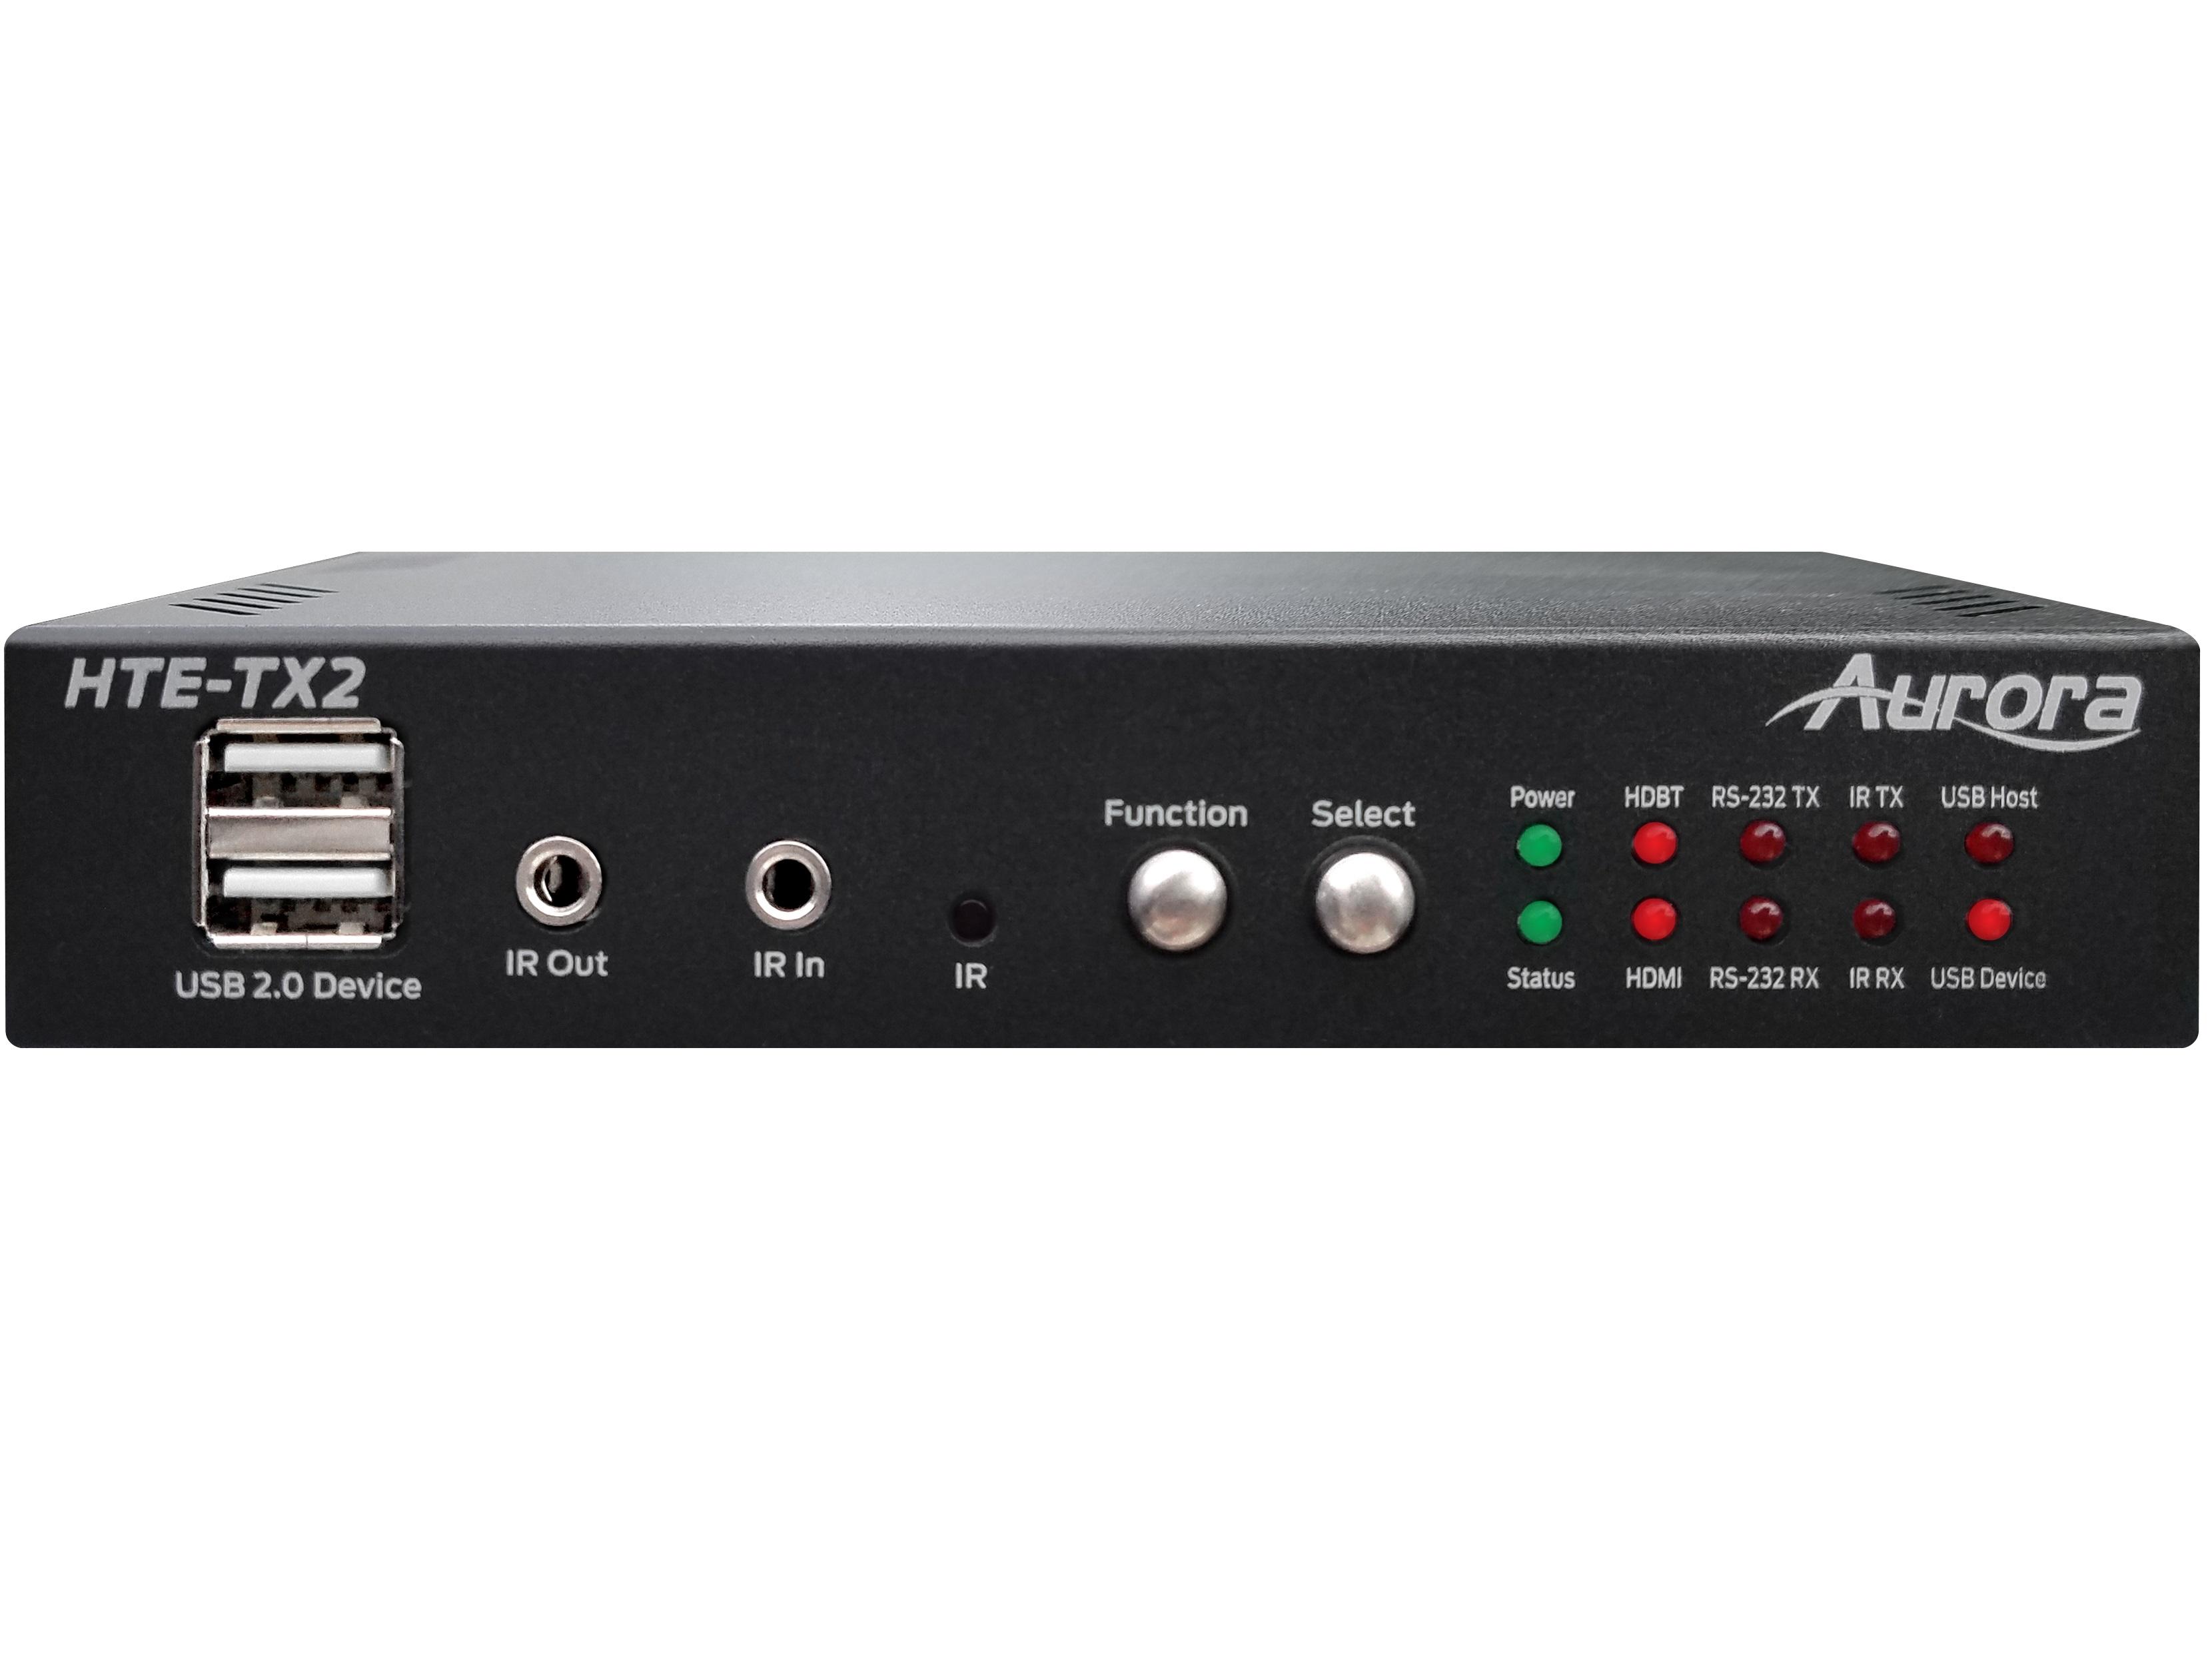 HTE-TX2 4K60 HDR 2xHDMI/HDBaseT 2.0 Extender (Transmitter) with Dante/USB/IP/IR up to 100m/330ft (Black) by Aurora Multimedia